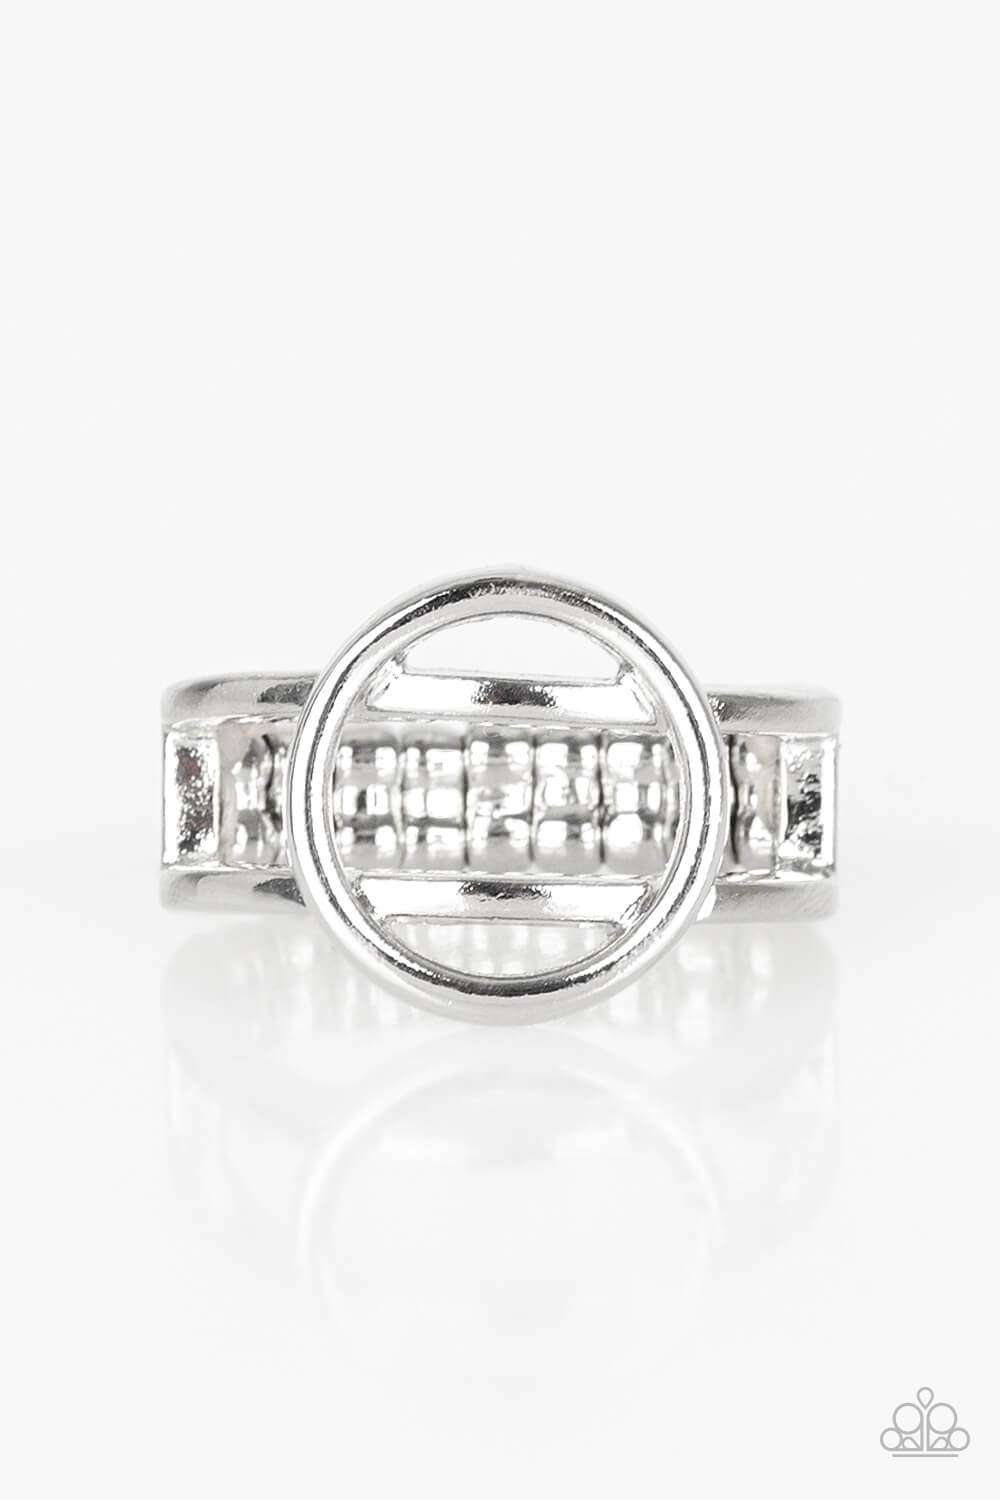 City Center Chic - Silver Ring - Princess Glam Shop